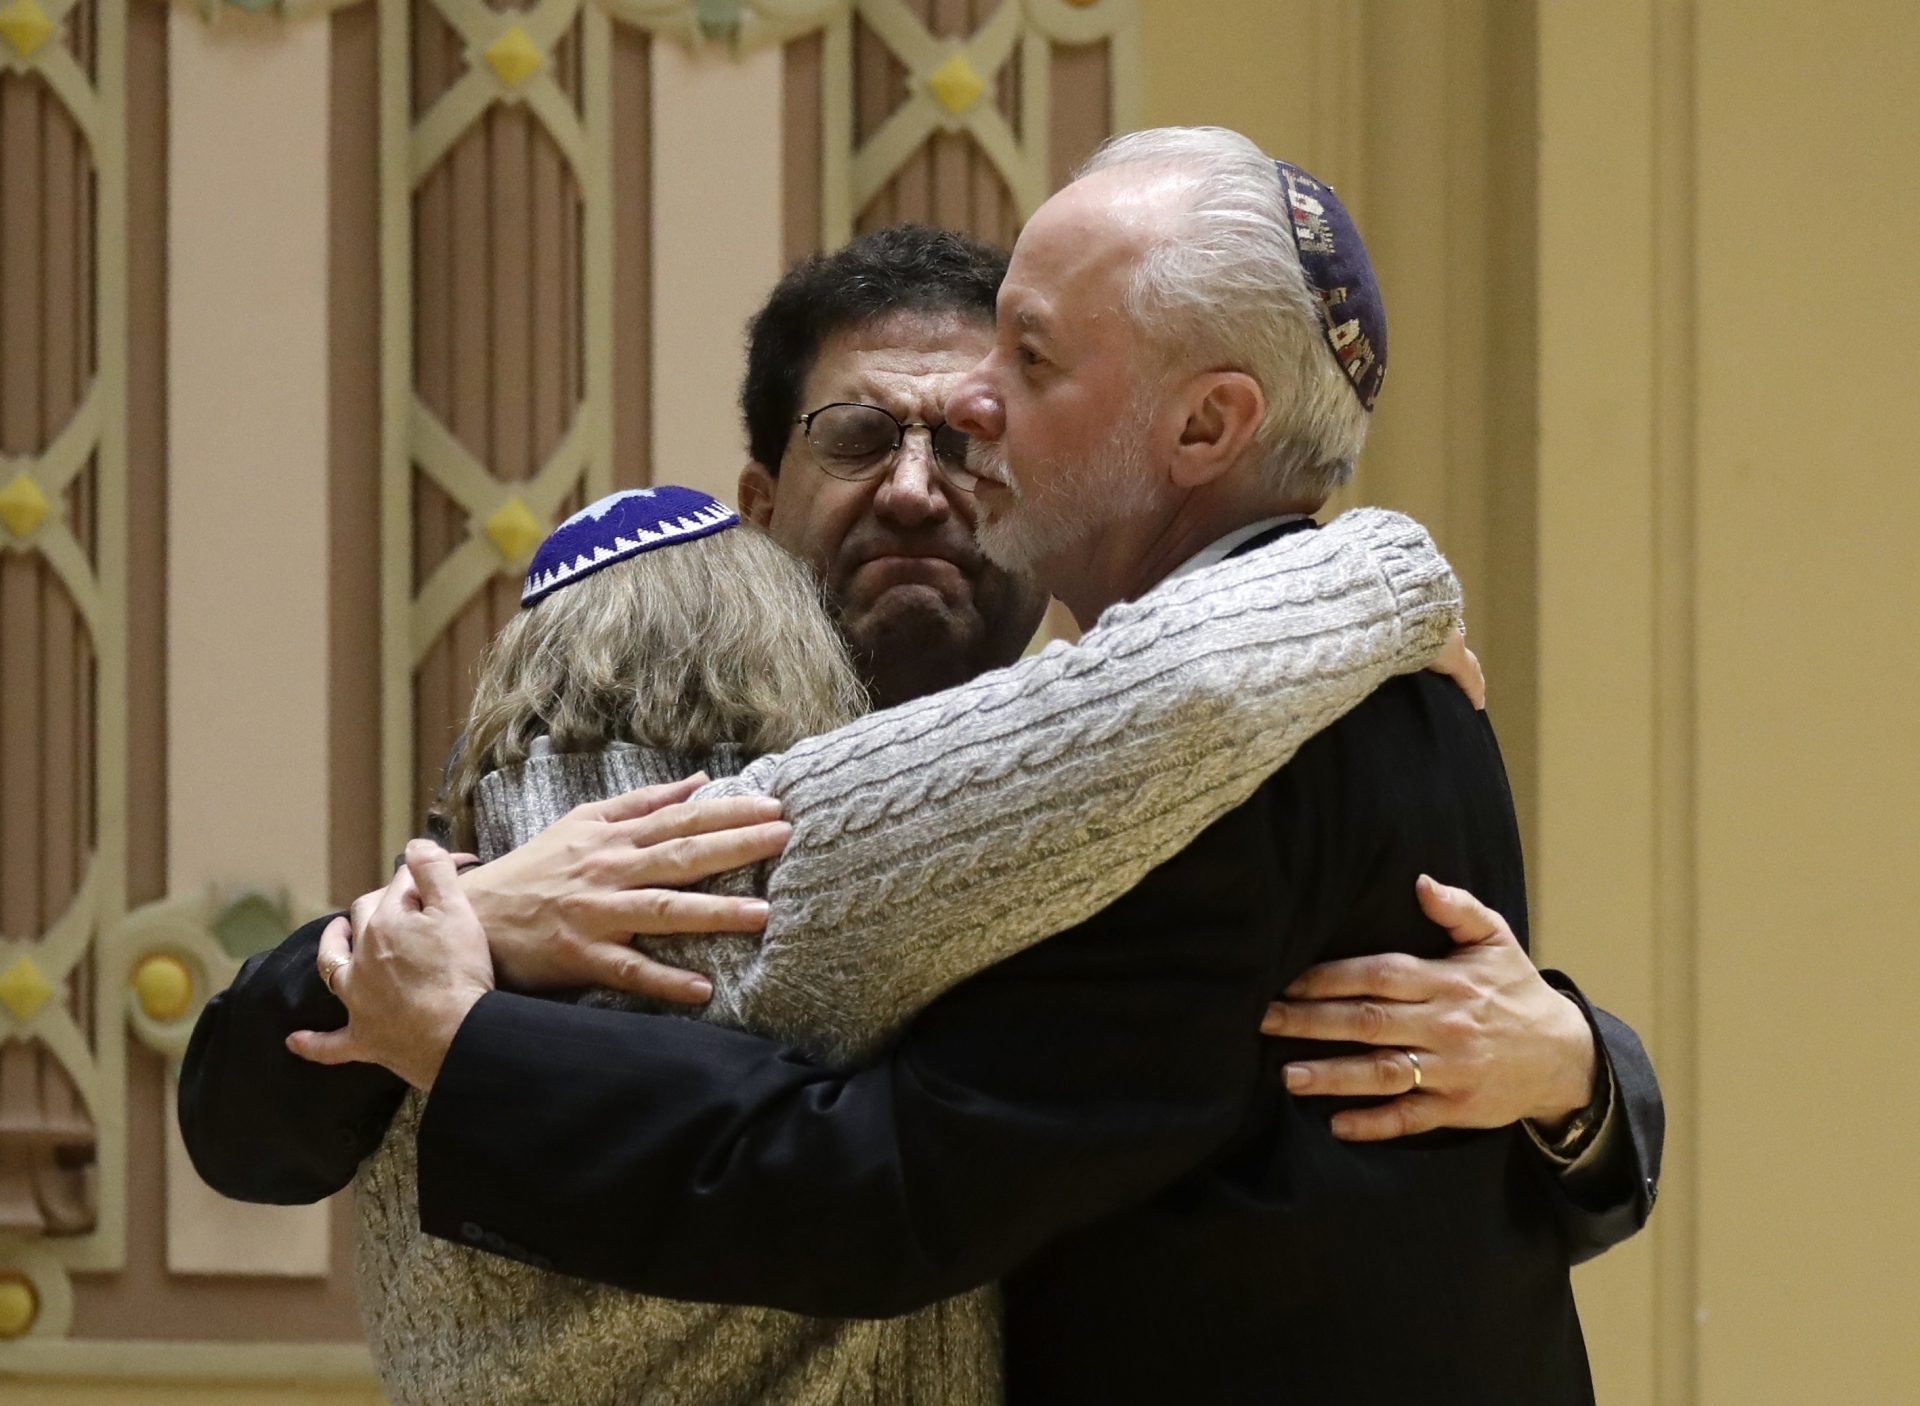 FILE PHOTO: Rabbi Jeffrey Myers, right, of Tree of Life/Or L'Simcha Congregation hugs Rabbi Cheryl Klein, left, of Dor Hadash Congregation and Rabbi Jonathan Perlman during a community gathering held in the aftermath of a deadly shooting at the Tree of Life Synagogue in Pittsburgh, Sunday, Oct. 28, 2018.